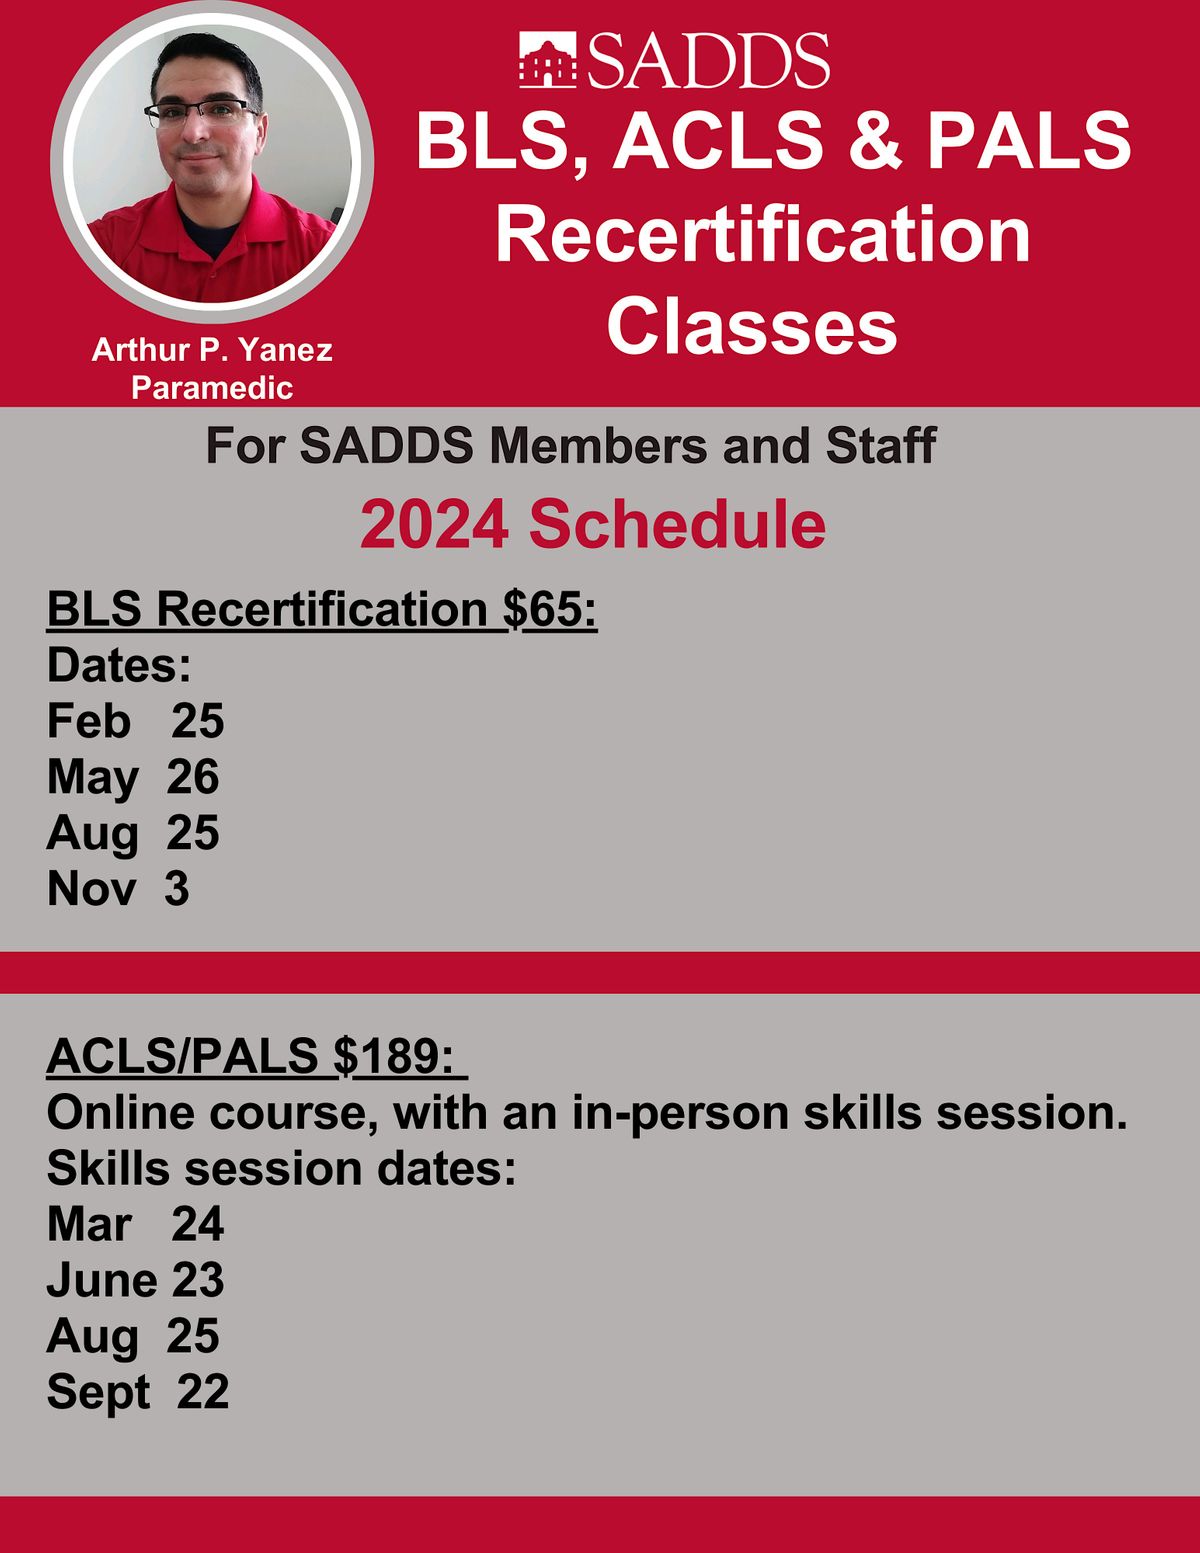 ACLS & PALS Recertification (on-line course and in-person skills session)